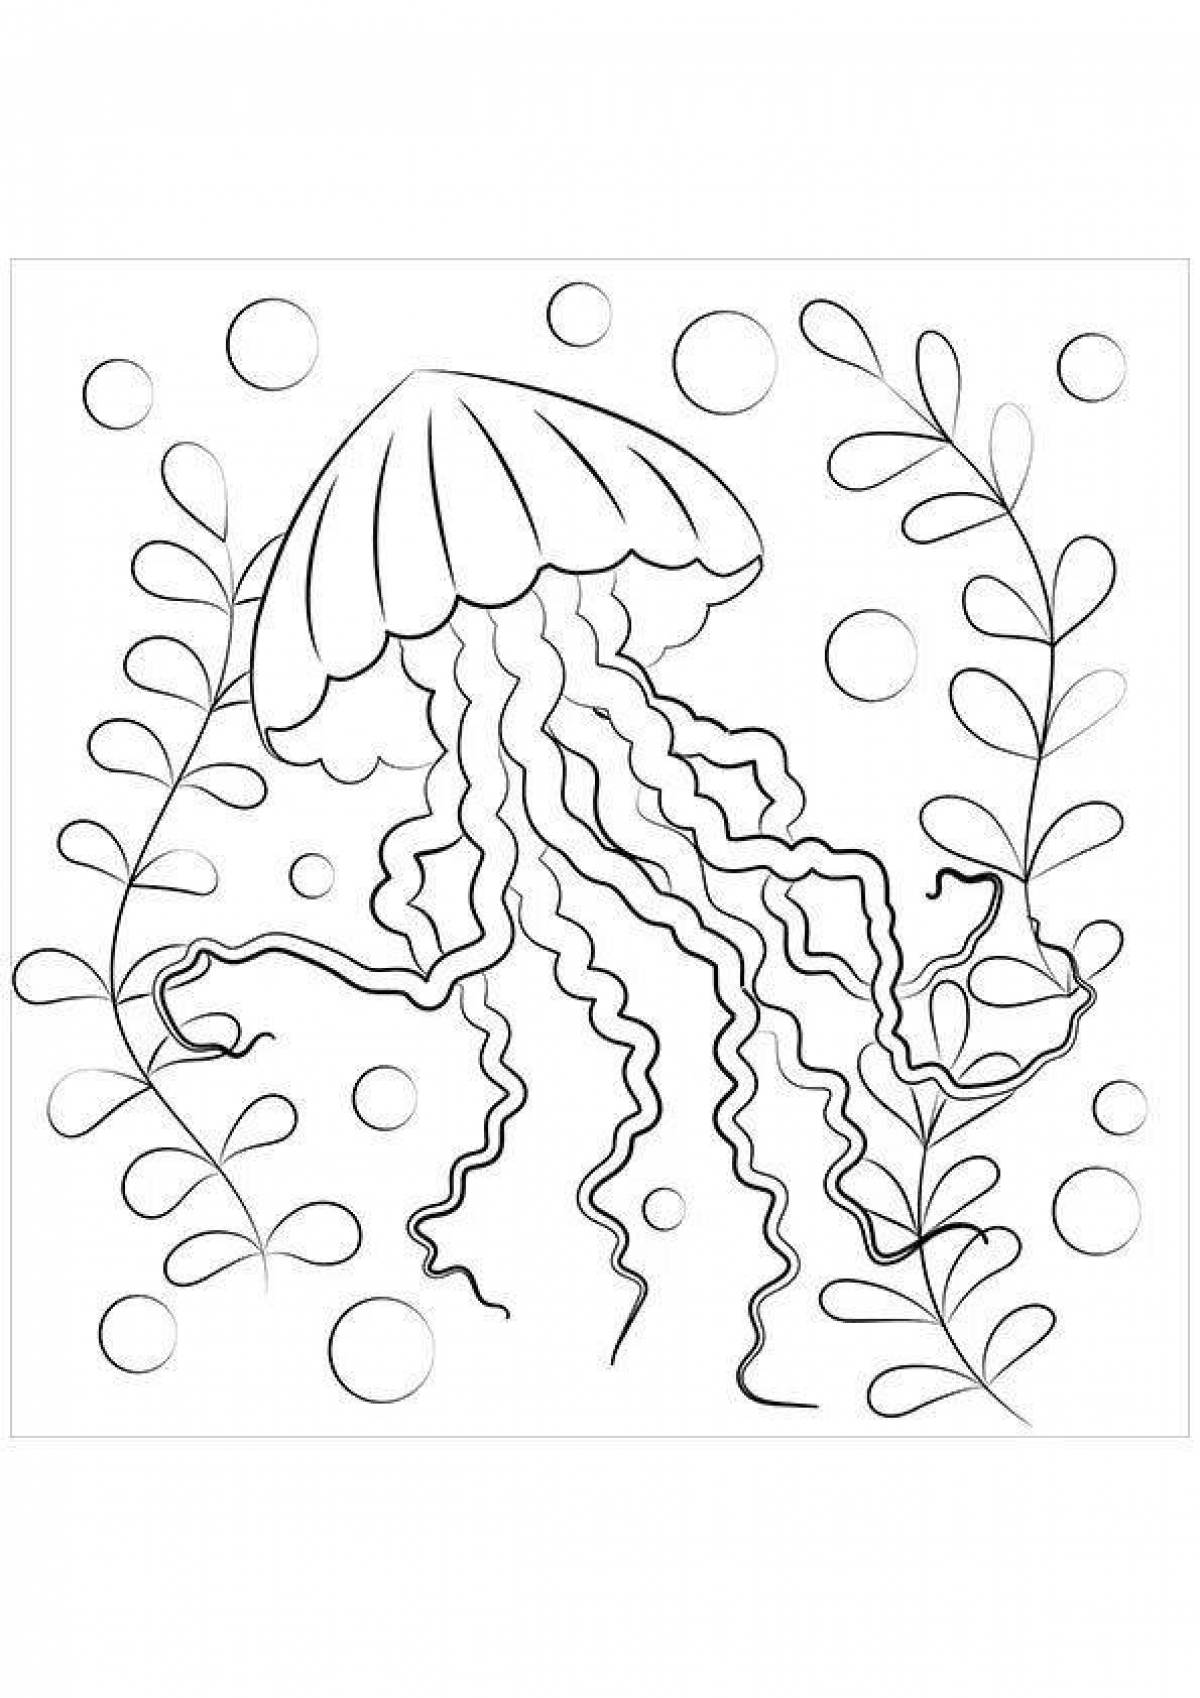 Merry jellyfish coloring book for kids